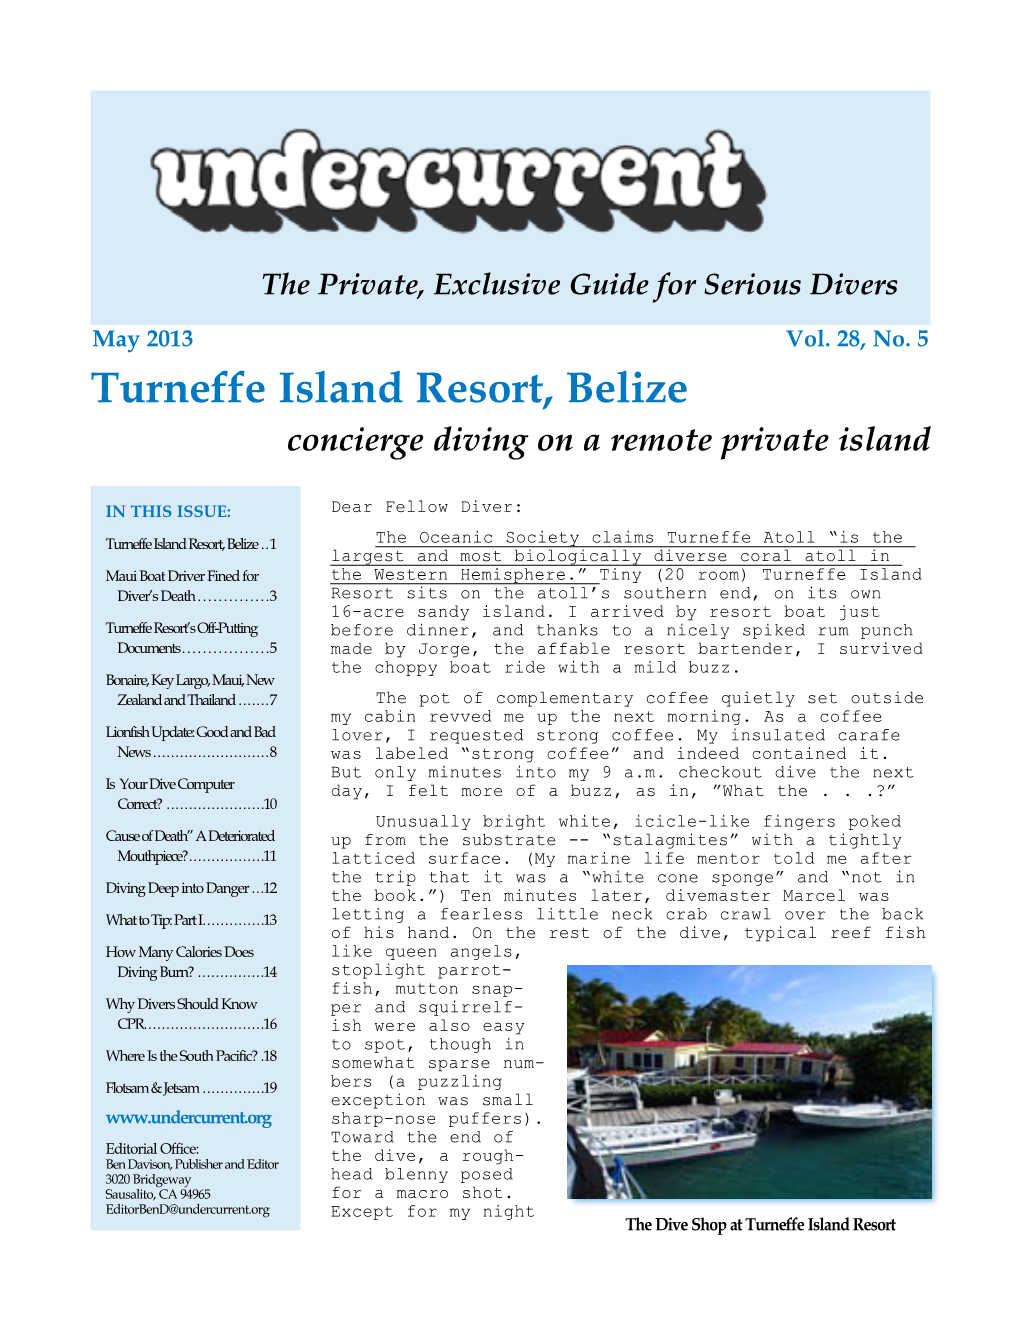 Turneffe Island Resort, Belize + [Other Articles] Undercurrent, May 2013